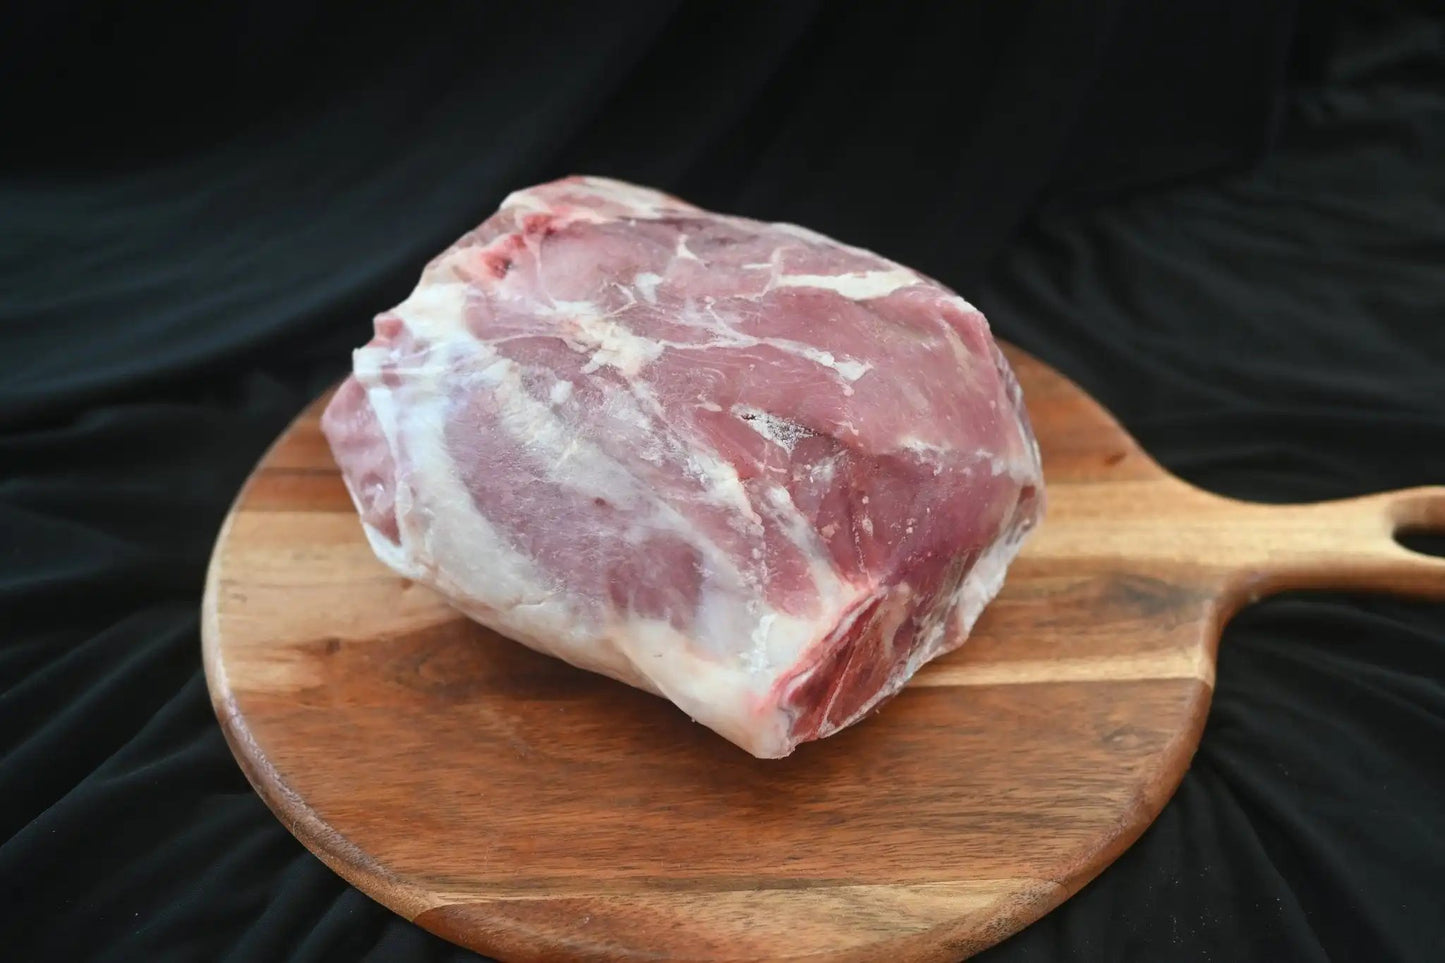 Grass-fed Icelandic Leg of Lamb (Bone-in)Savor the extraordinary flavor and tenderness of our Grass-Fed Icelandic Leg of Lamb, a culinary masterpiece hailing from the pristine pastures of Iceland.
Raised wiGrass-fed Icelandic LegThe Hufeisen-Ranch (WYO Wagyu)